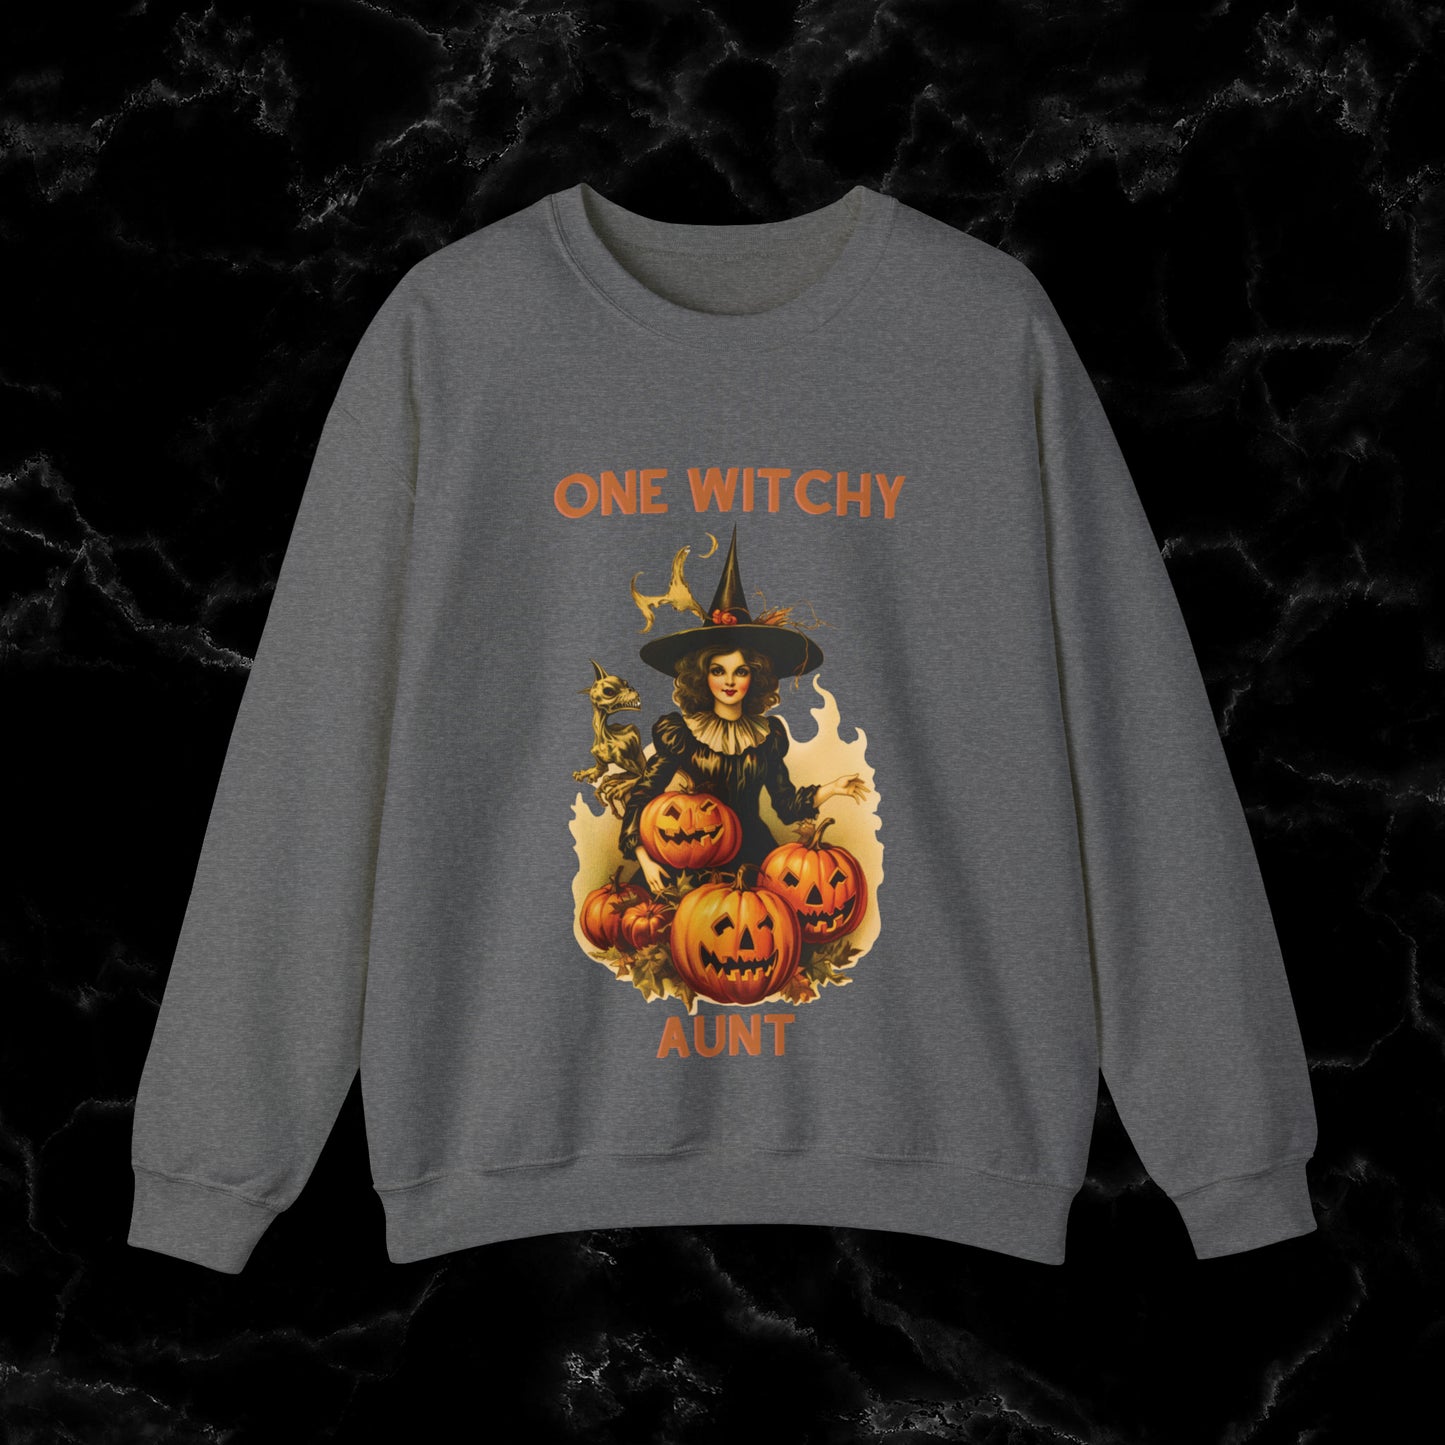 One Witchy Aunt Sweatshirt - Cool Aunt Shirt, Feral Aunt Sweatshirt, Perfect Gifts for Aunts, Auntie Sweatshirt Sweatshirt S Graphite Heather 